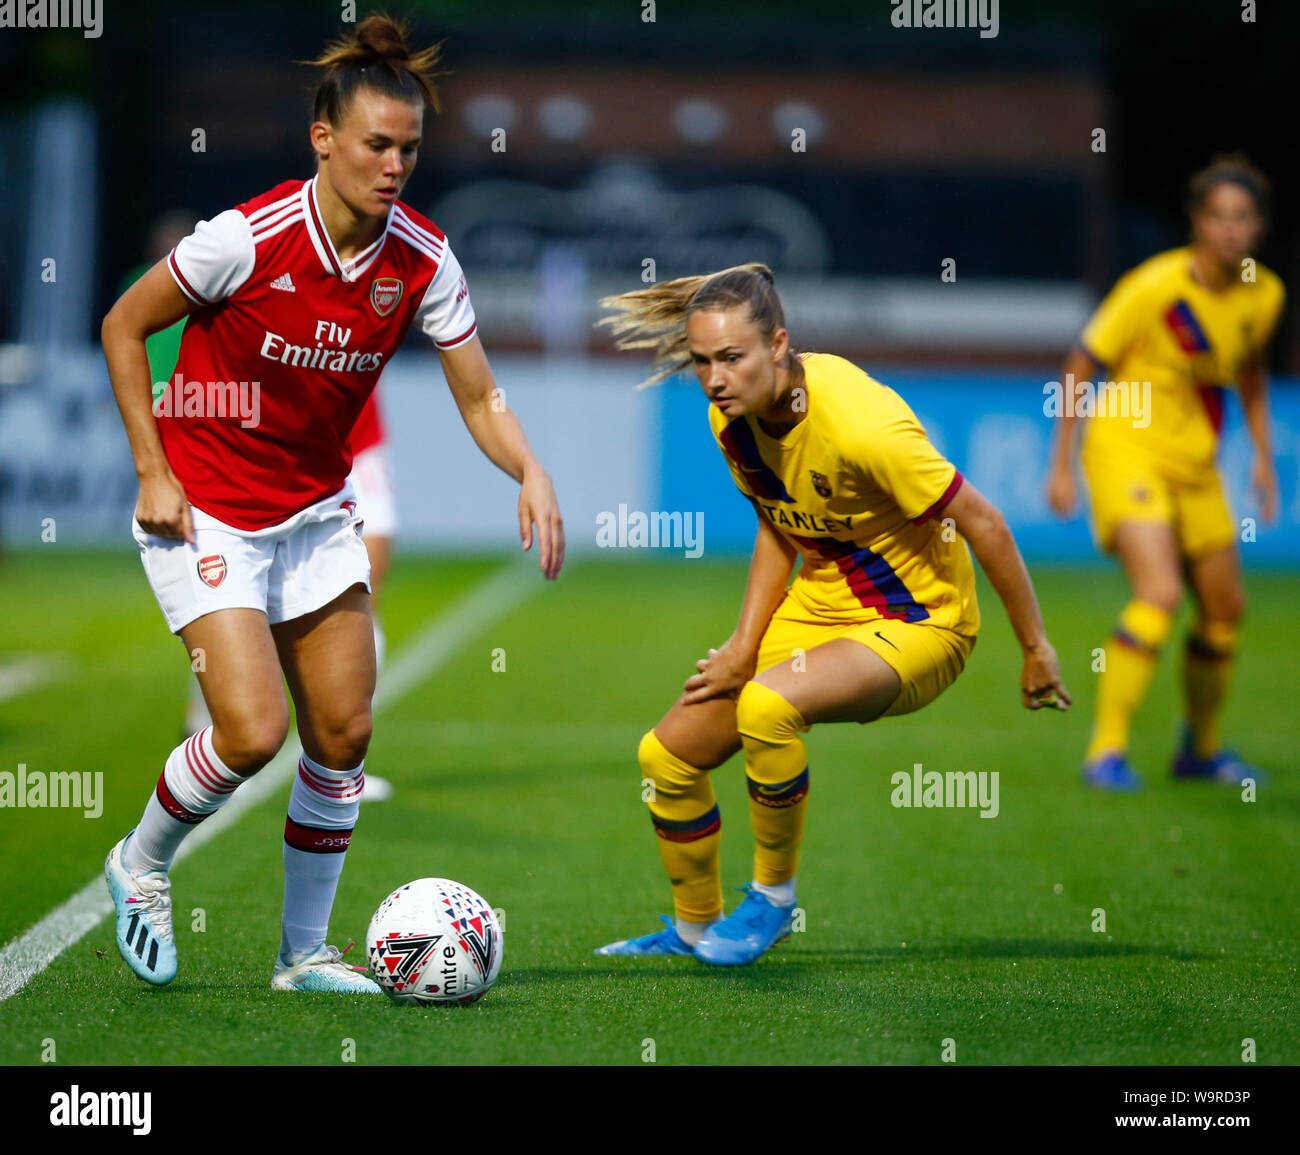 Boreham Wood, UK. 14th Aug, 2019. BOREHAMWOOD, ENGLAND - AUGUST 14: Katrine Veje of Arsenal during the pre-season friendly match between Arsenal and Barcelona Women at Meadow Park on August 14, 2019 in Borehamwood, England. Credit: Action Foto Sport/Alamy Live News Stock Photo